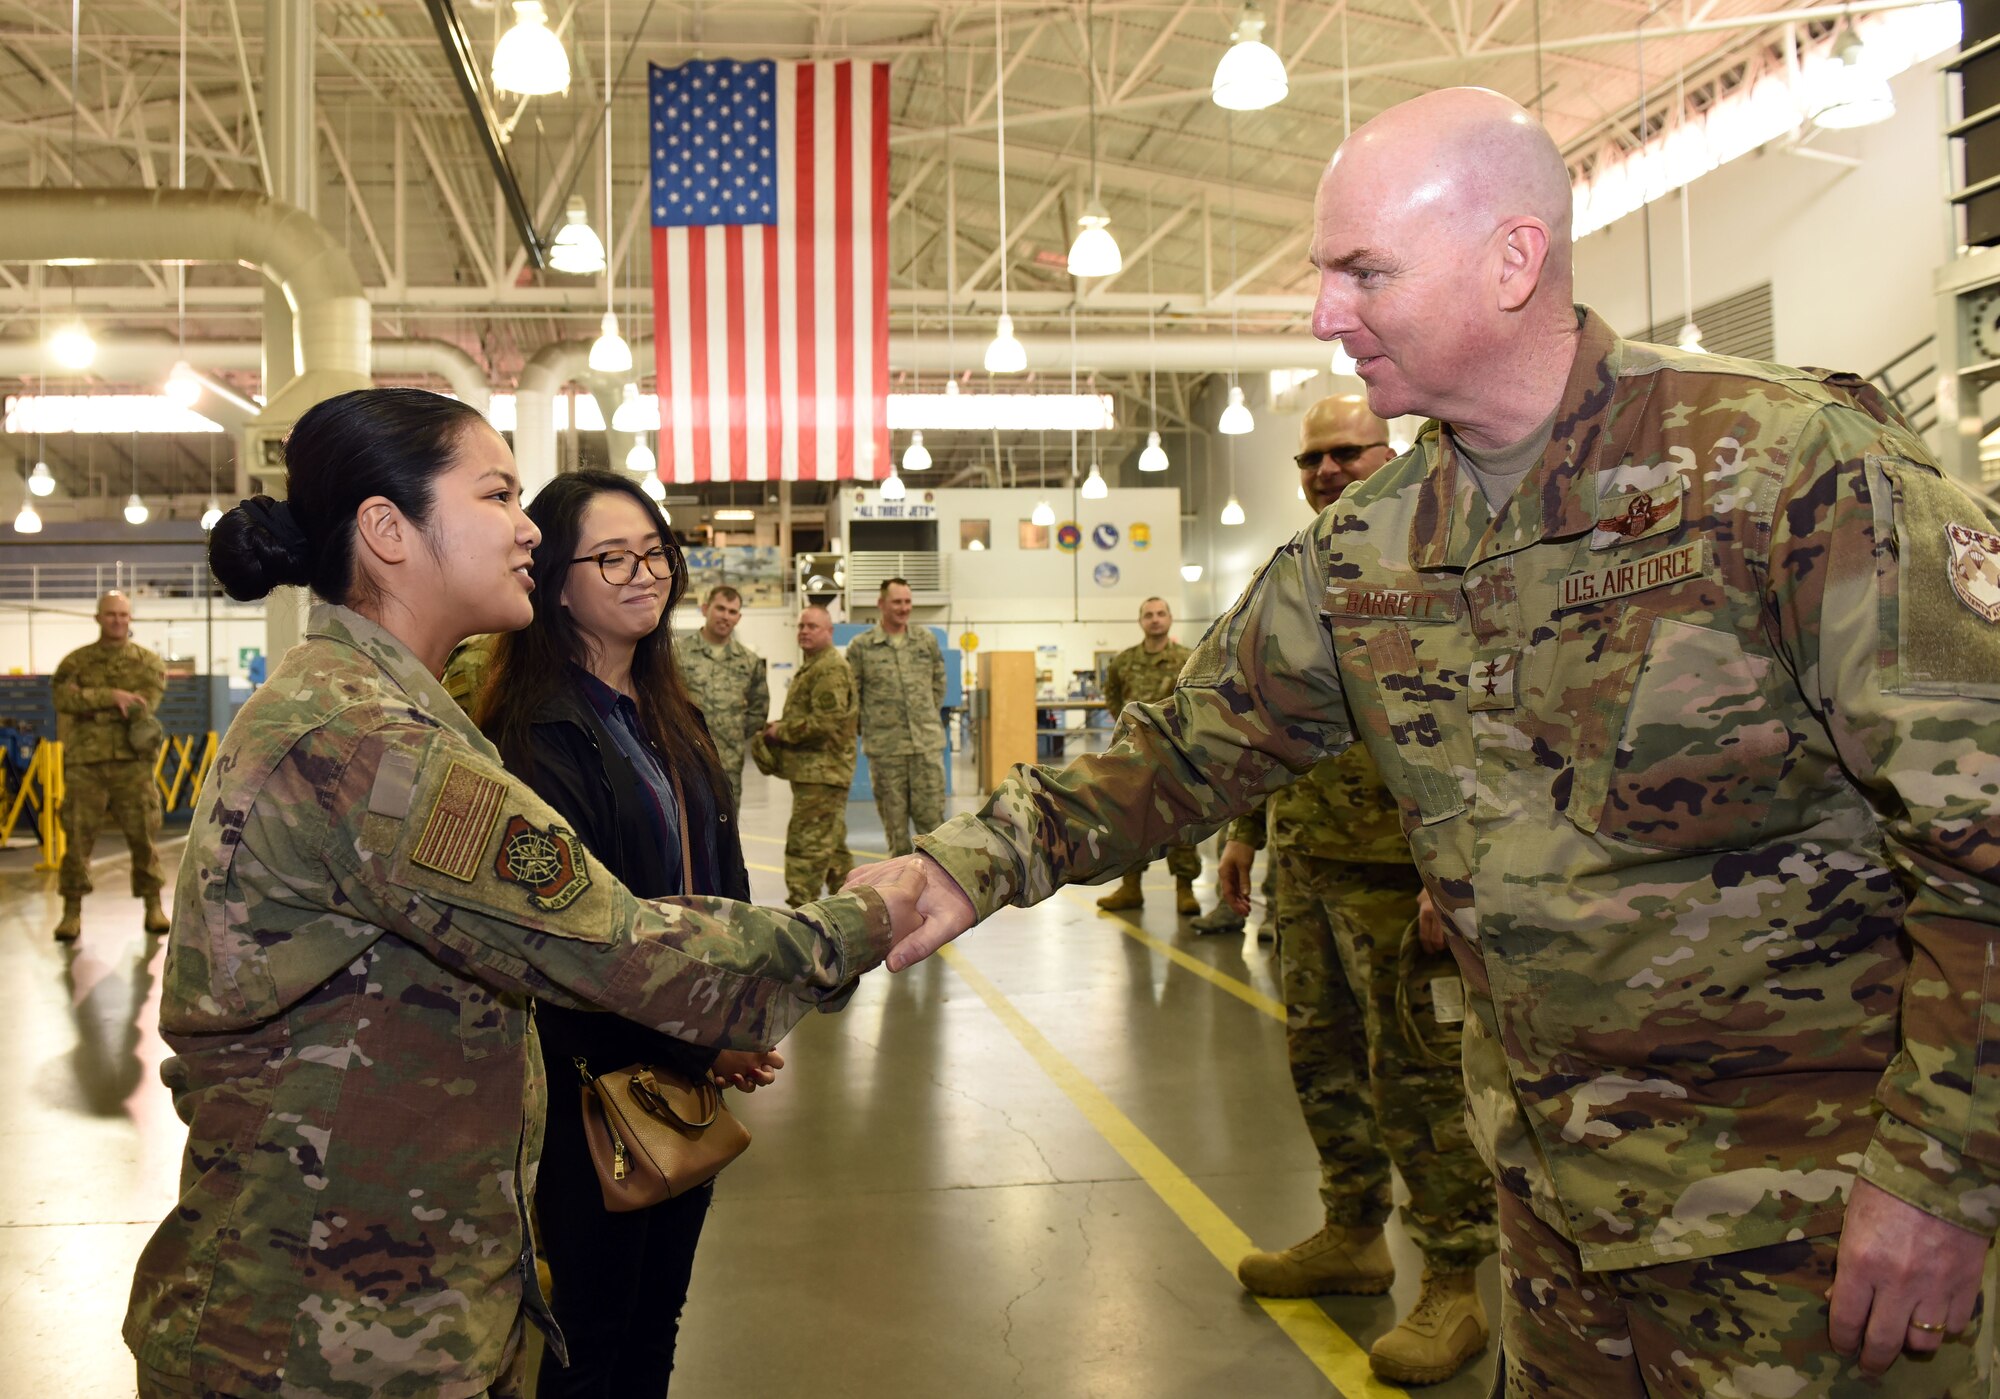 U.S. Air Force Maj. Gen. Sam Barrett, 18th Air Force commander, presents a coin to star performer U.S. Air Force Airman 1st Class Kristyn Fernando, 60th Maintenance Squadron fuel system apprentice, during a visit to Travis Air Force Base, California, March 5, 2019. Barrett, along with his wife, Kelly and U.S. Air Force Chief Master Sgt. Chris Simpson, 18th Air Force command chief, toured the base March 4 to 8 as part of a scheduled visit. (U.S. Air Force photo by Airman 1st Class Christian Conrad)